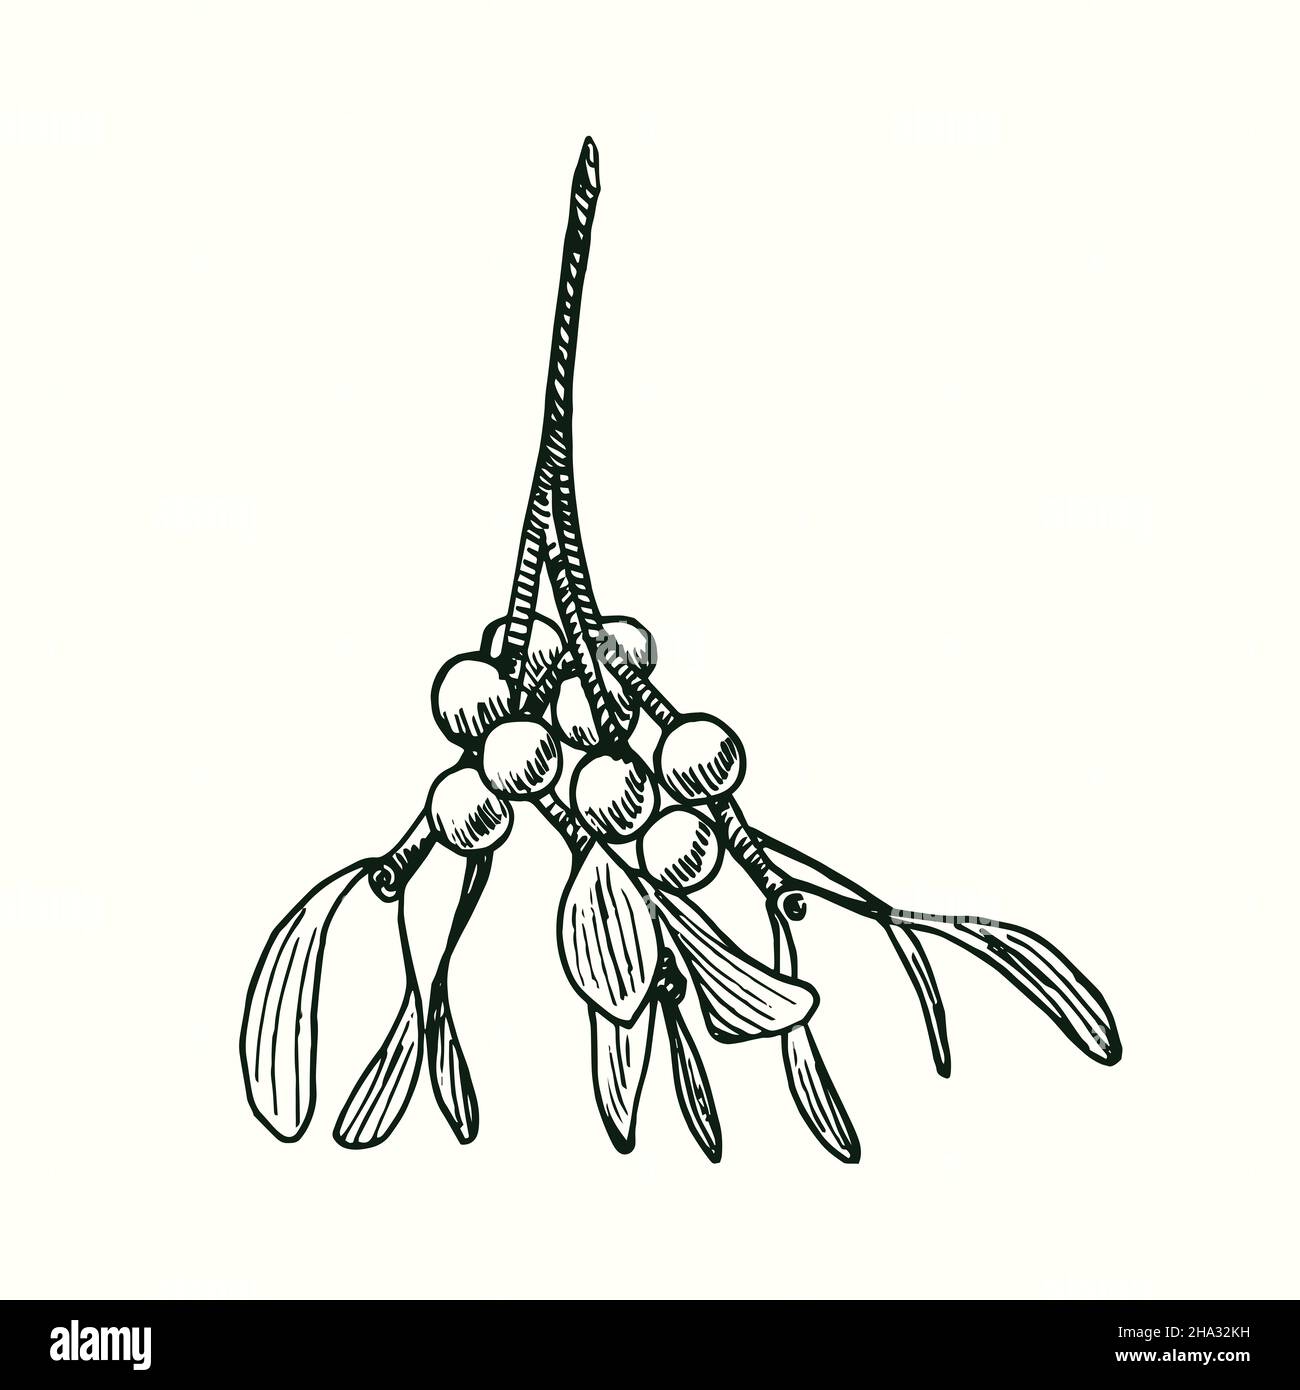 European mistletoe (Viscum album) branch with leaves and berries. Ink black and white doodle drawing in woodcut style. Stock Photo